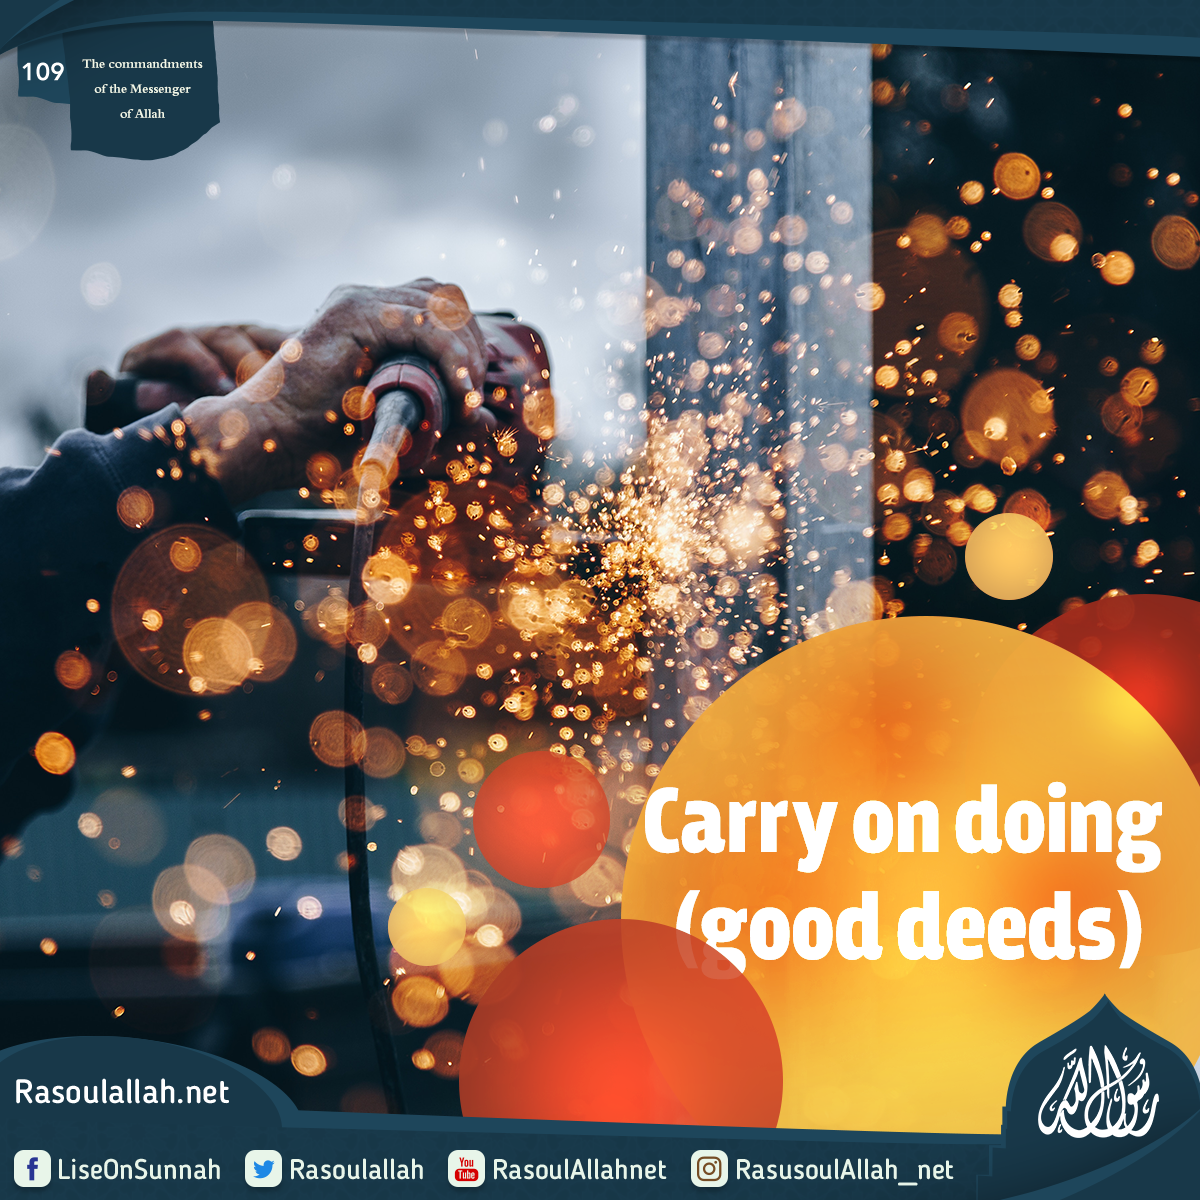 Carry on doing (good deeds)